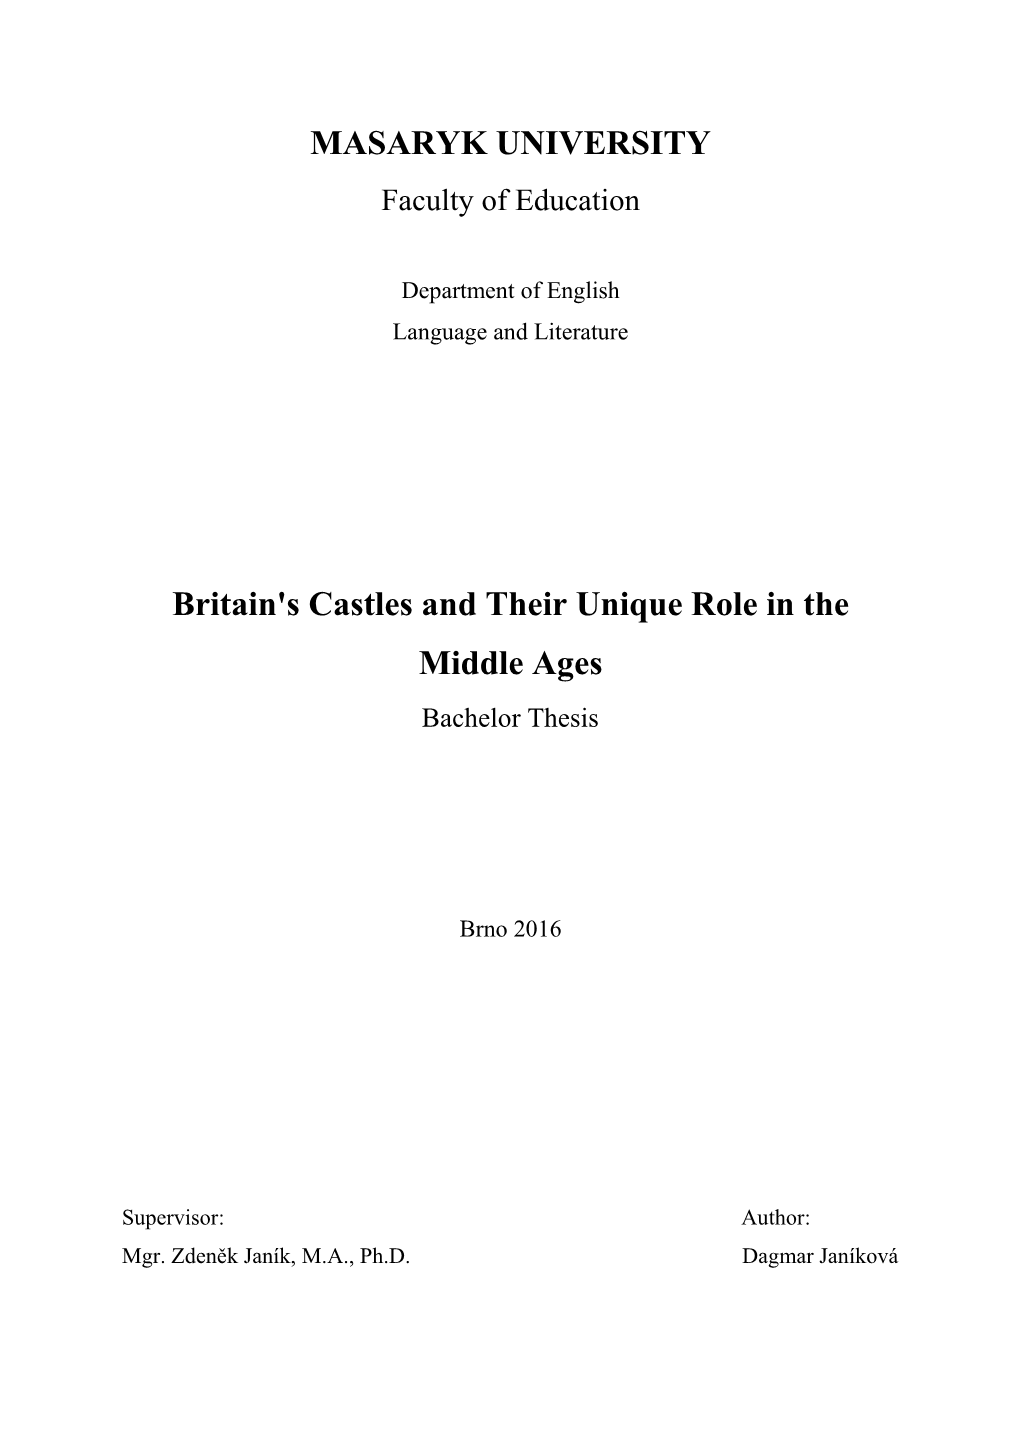 MASARYK UNIVERSITY Britain's Castles and Their Unique Role In